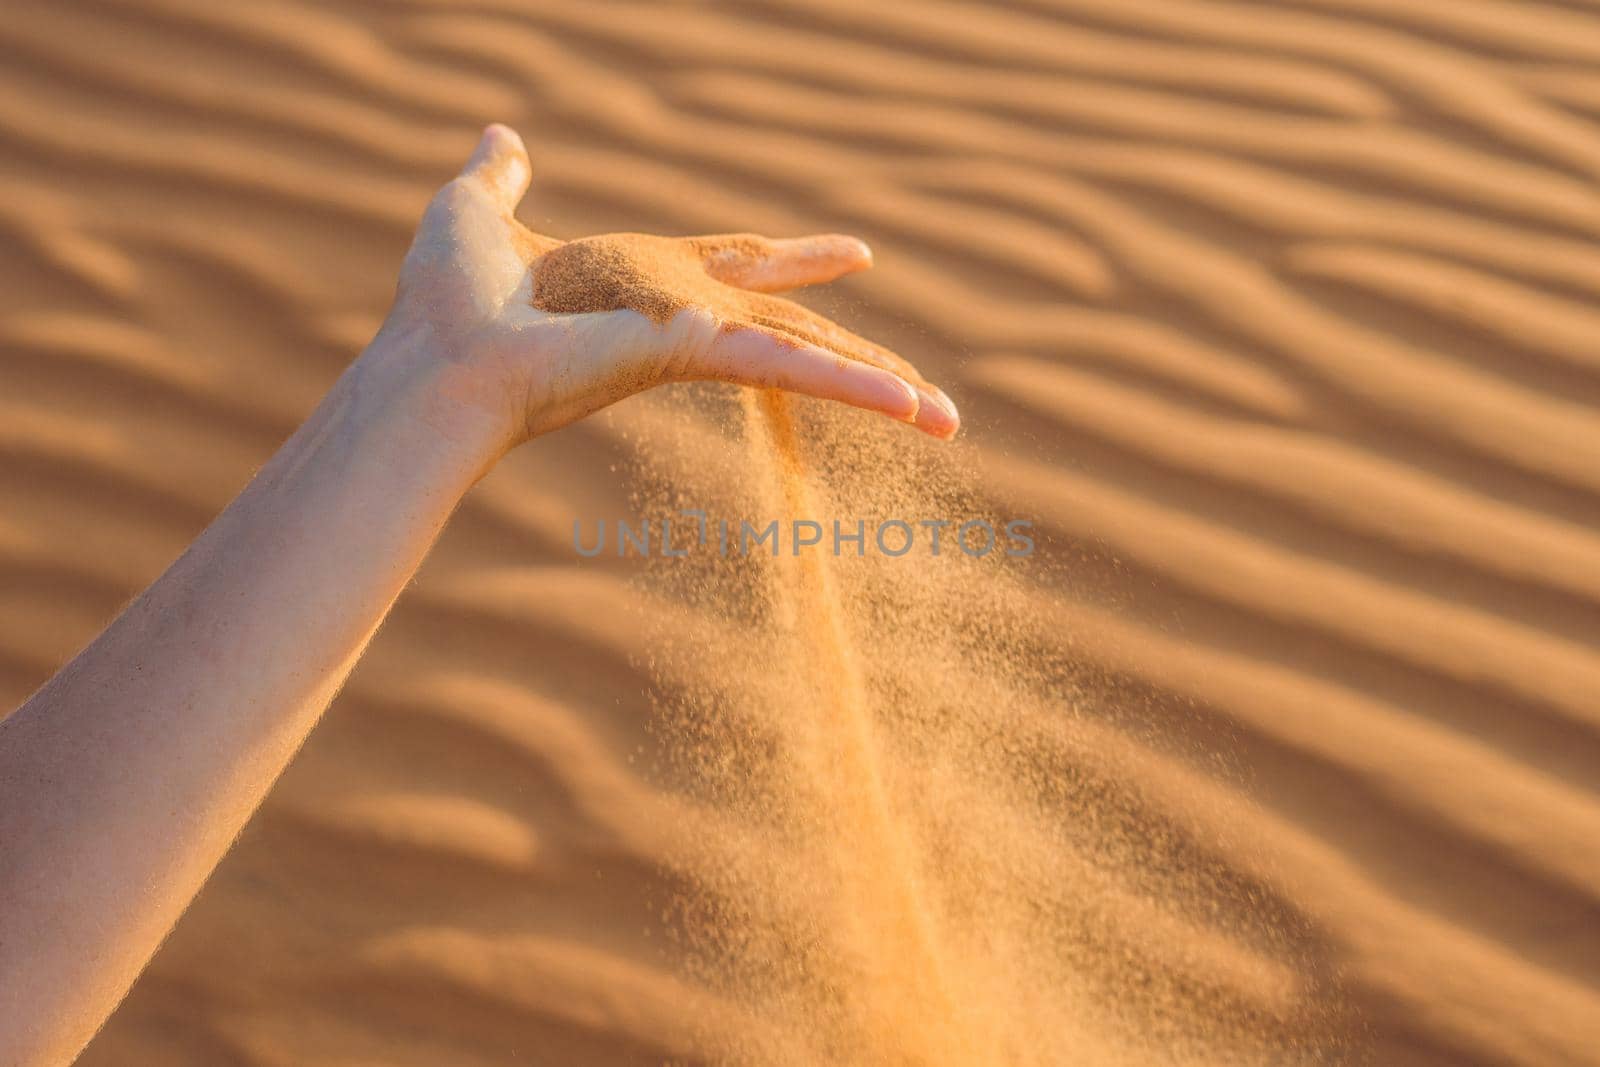 Sand slipping through the fingers of a woman's hand in the desert.